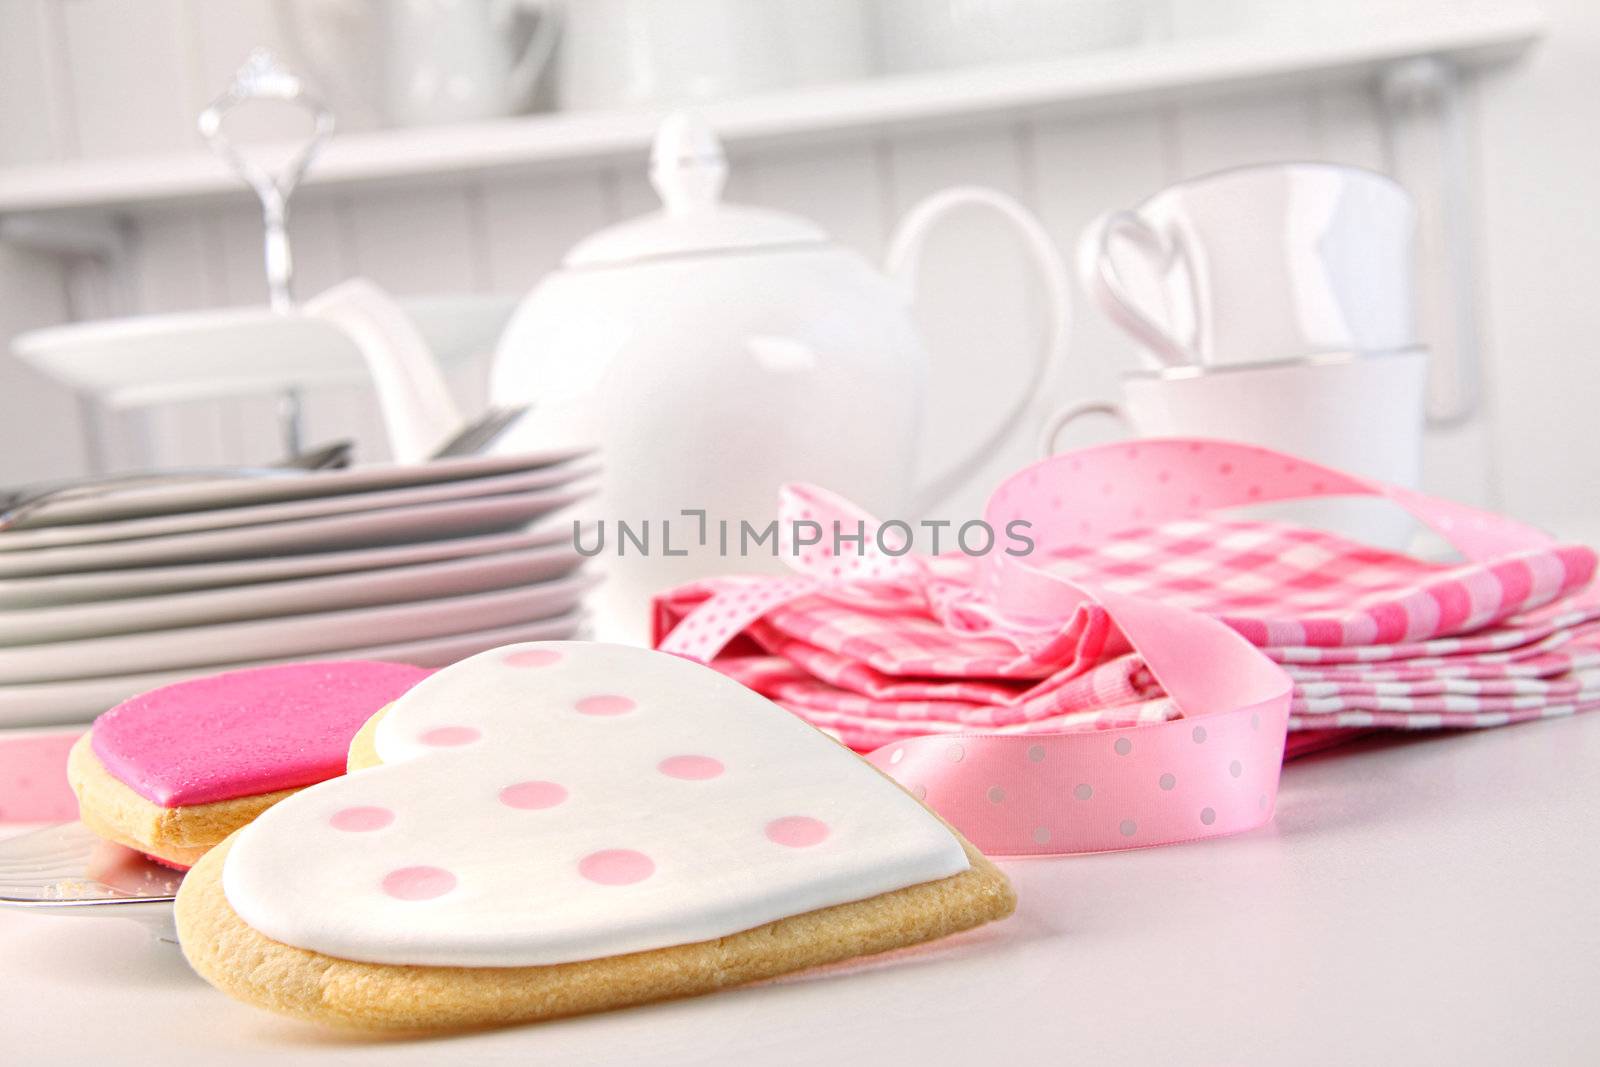 Pink heart-shape cookies for Valentine's Day by Sandralise